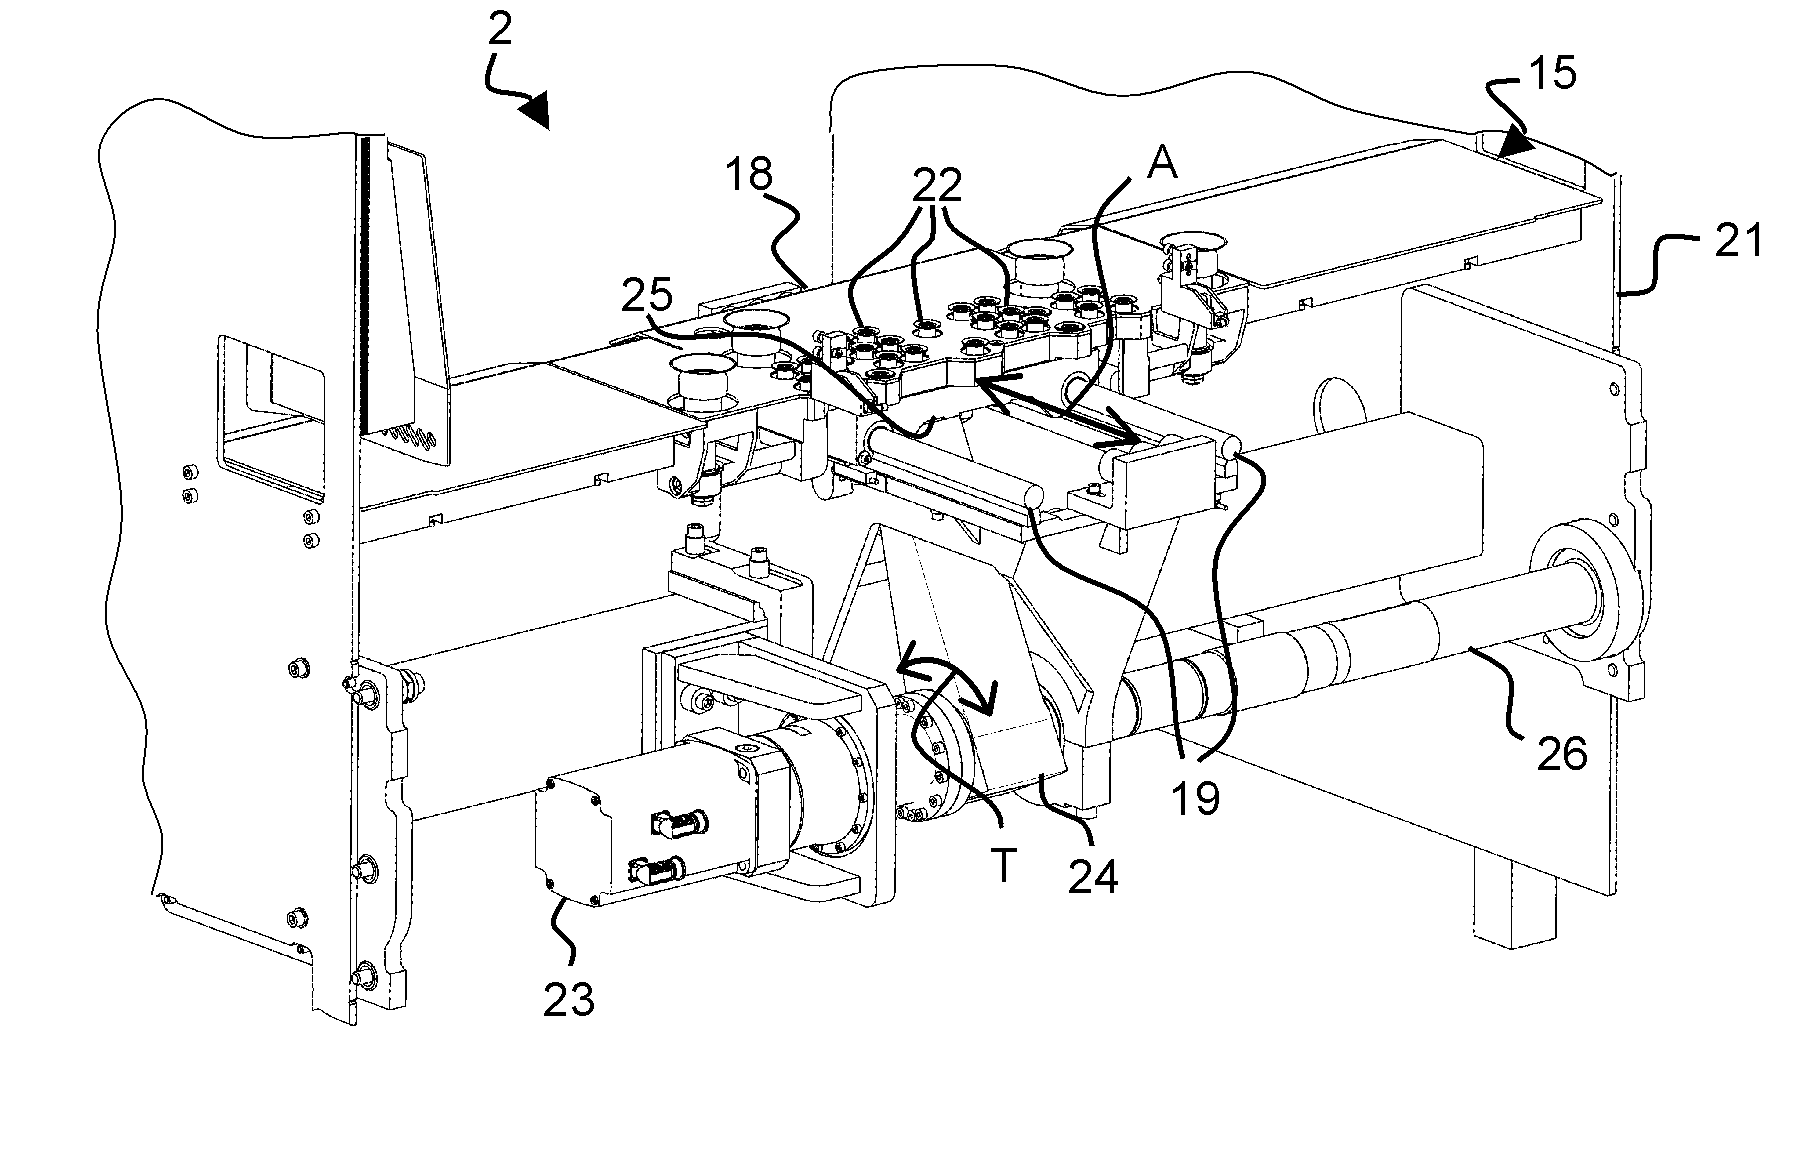 Device for positioning a plate element in an infeed station of a processing machine